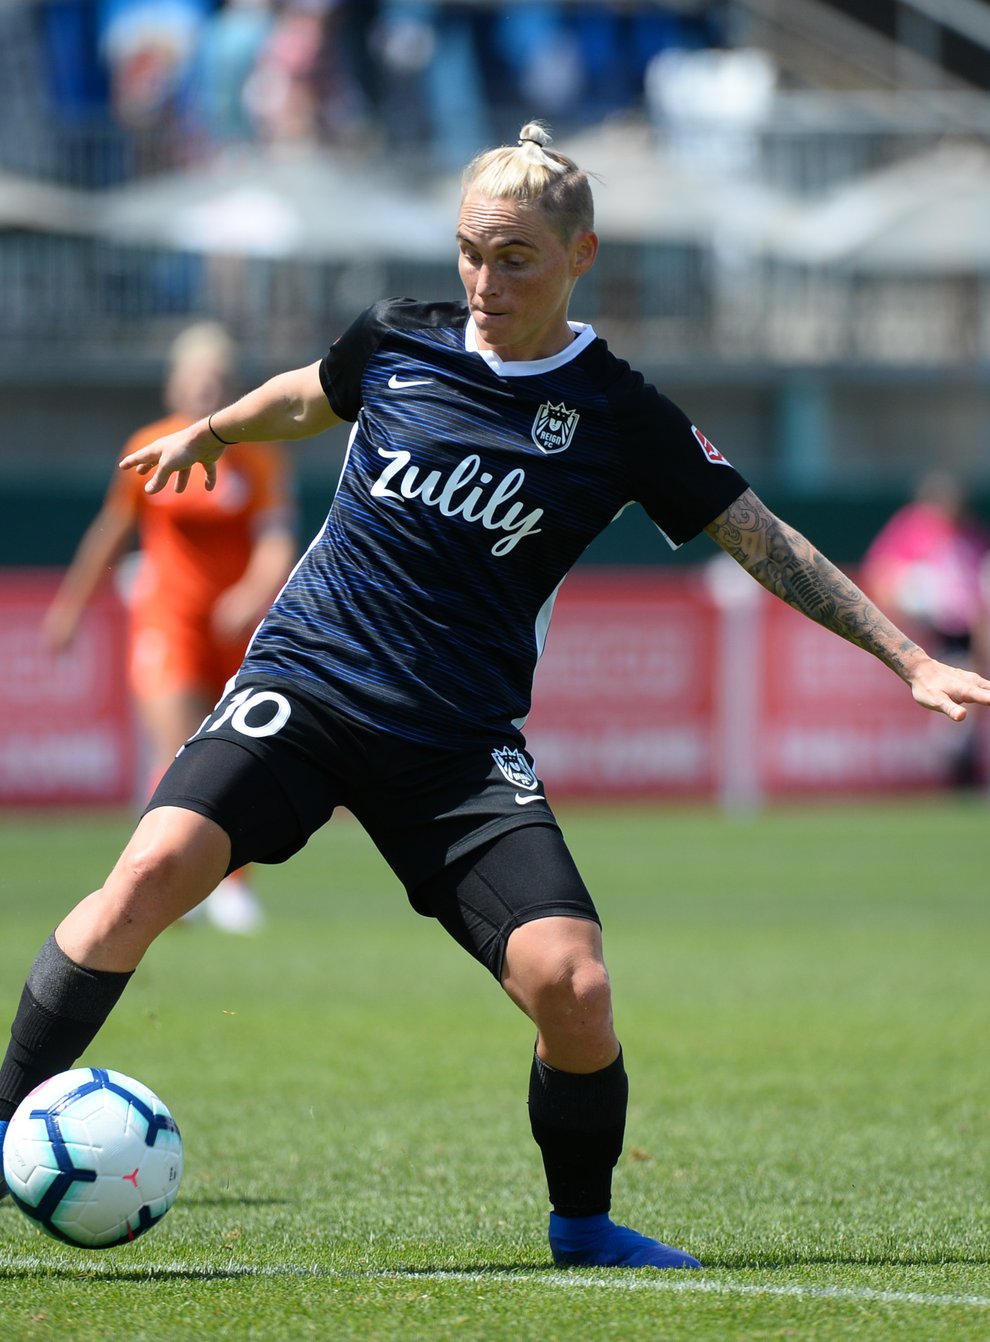 Fishlock's OL Reign side were disappointingly knocked out in the quarter-finals of the NWSL Challenge Cup